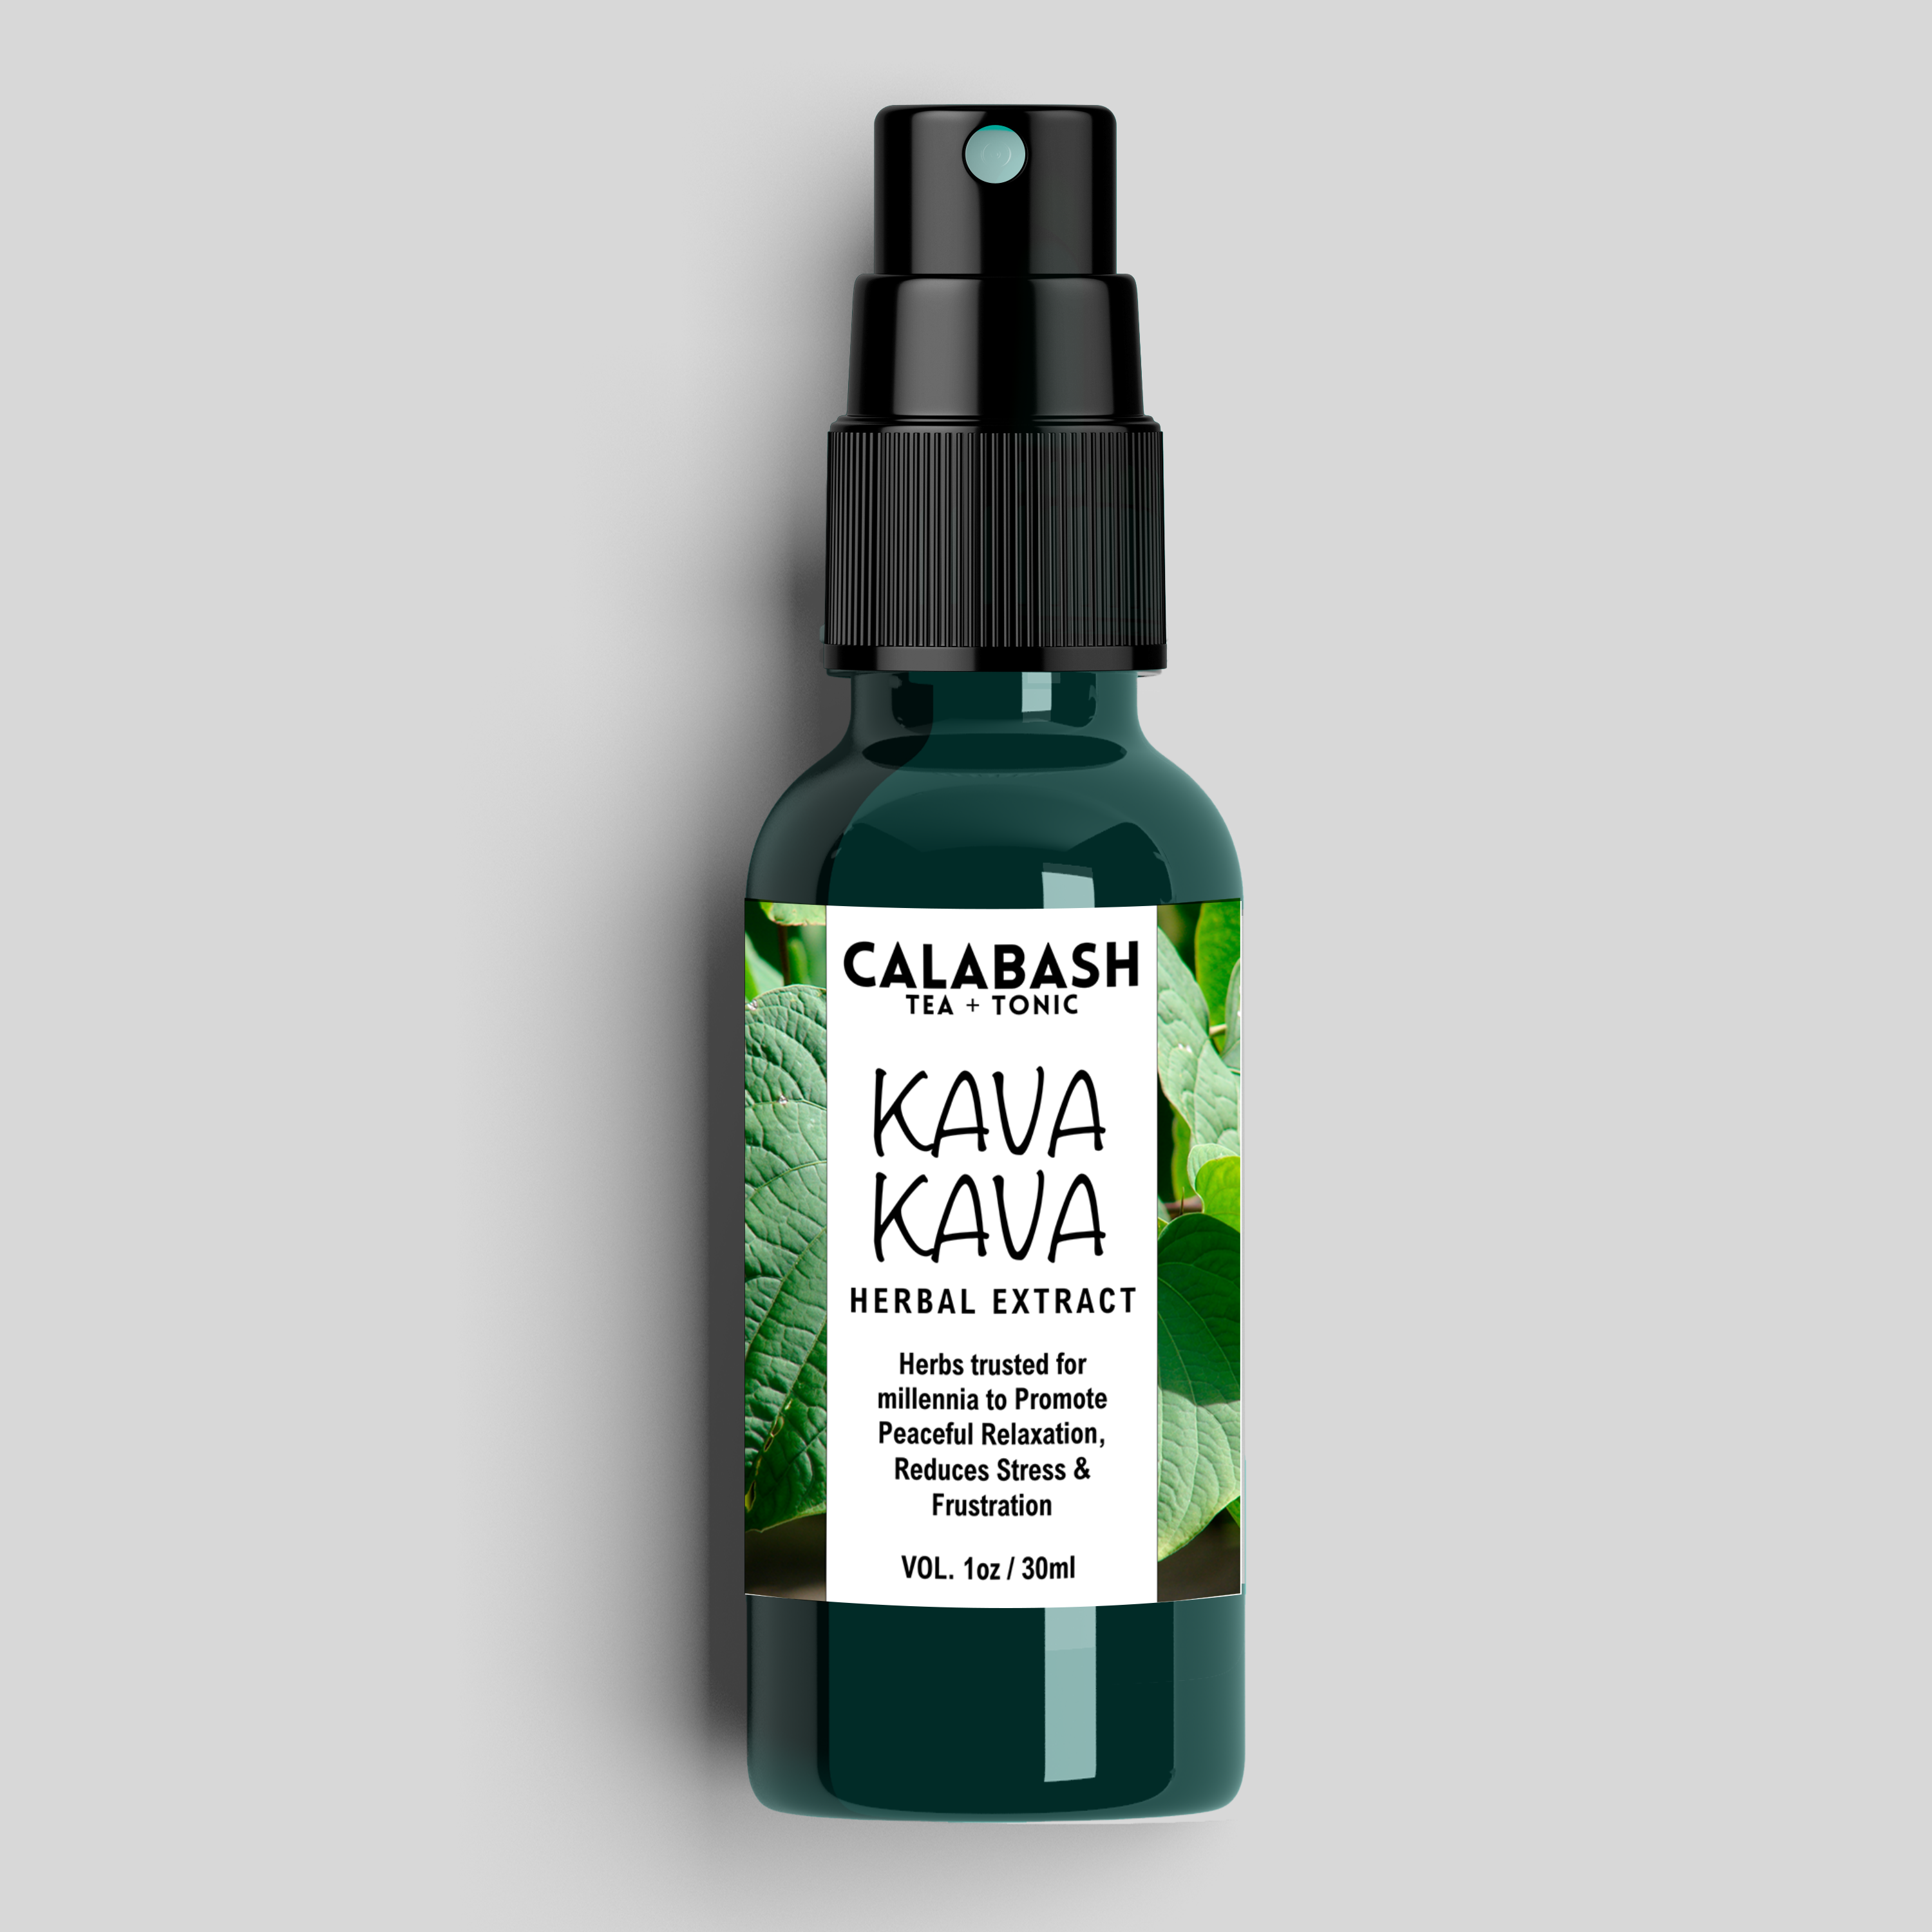 KAVA KAVA HERBAL EXTRACT: promotes deep relaxation + calm